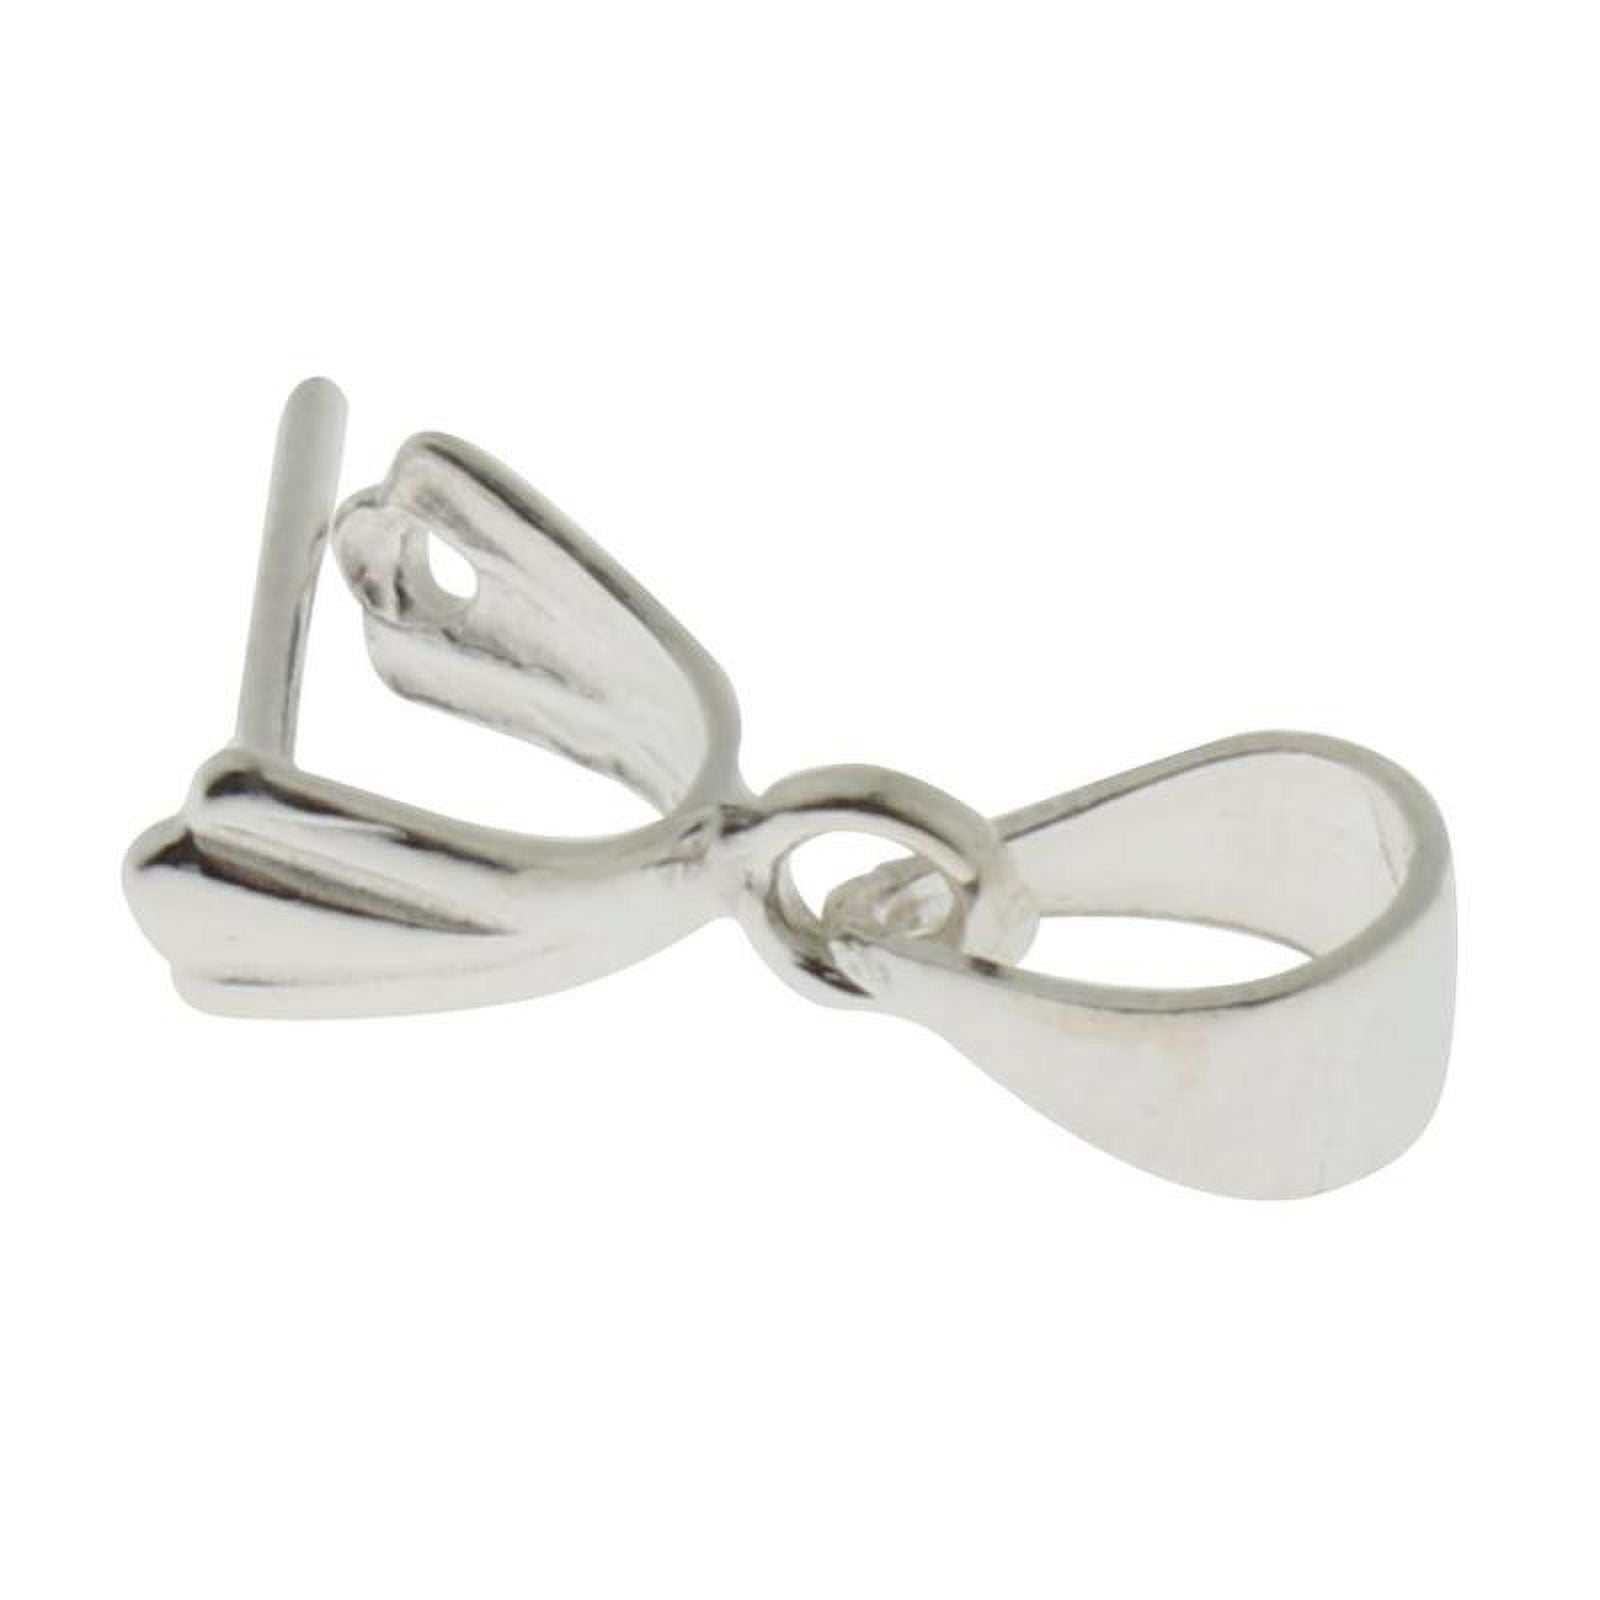  Qulltk 925 Sterling Silver Pinch Bails for Jewelry